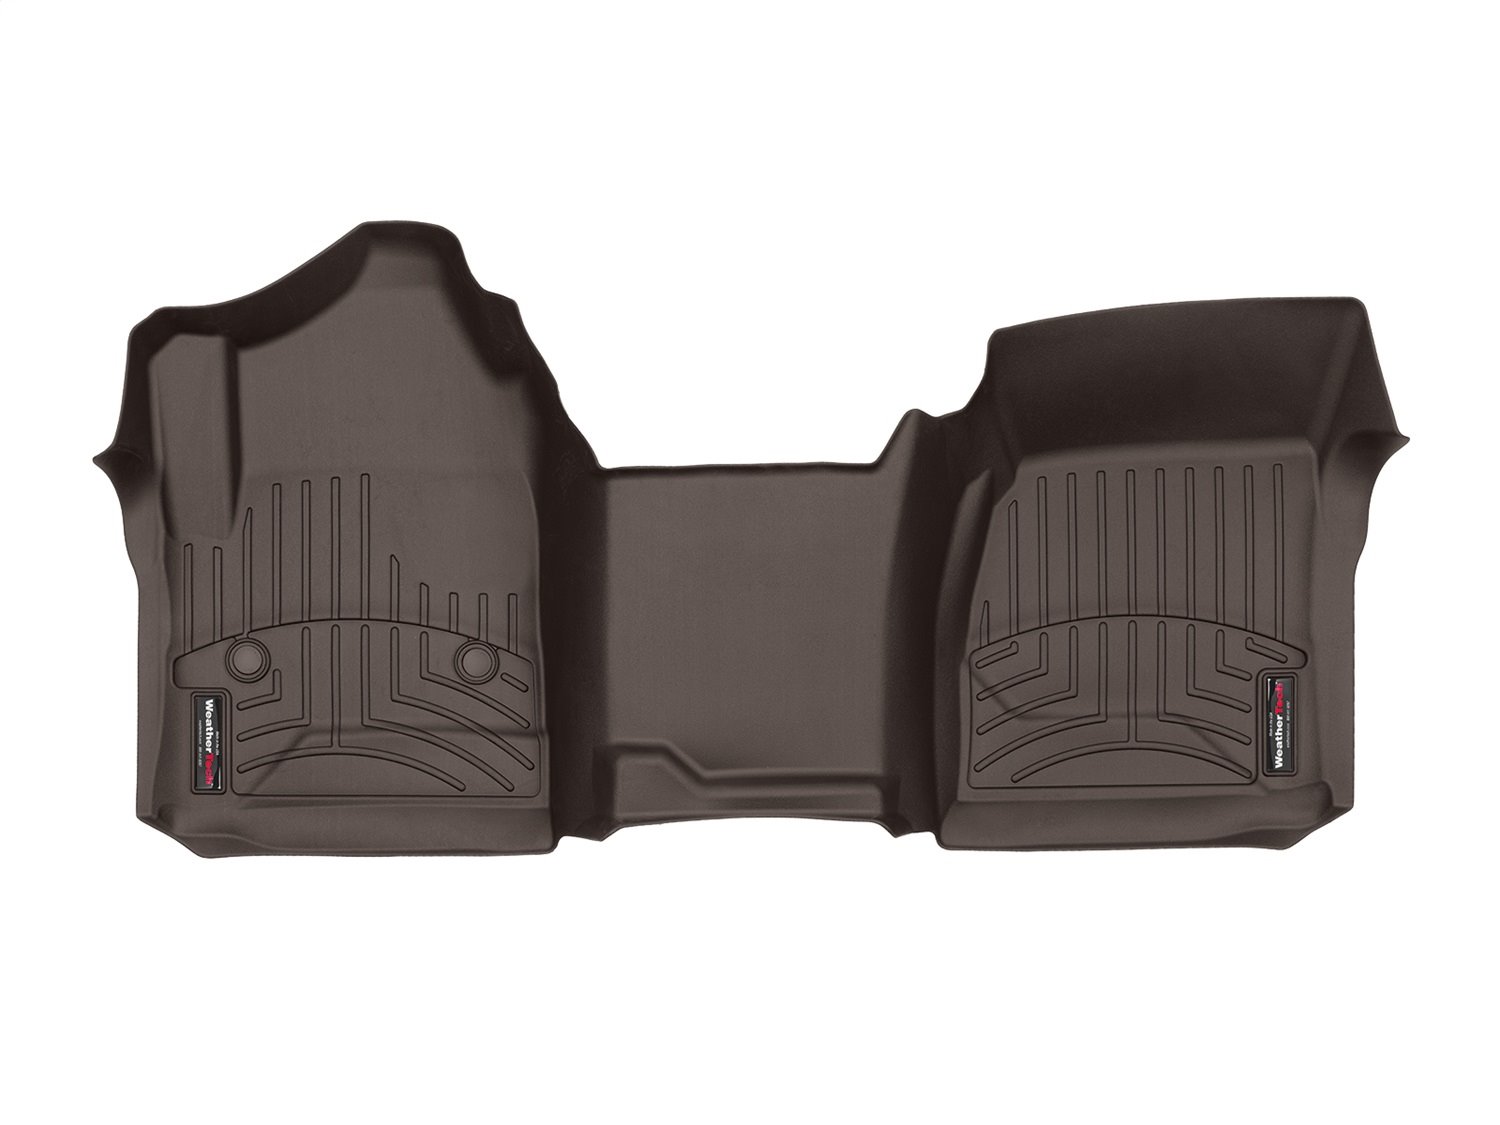 FRONT FLOORLINER COCOA CHEVROLET SILVERADO 2014-2017 OVER-THE-HUMP FITS REGULAR CAB ONLY; FITS 1500